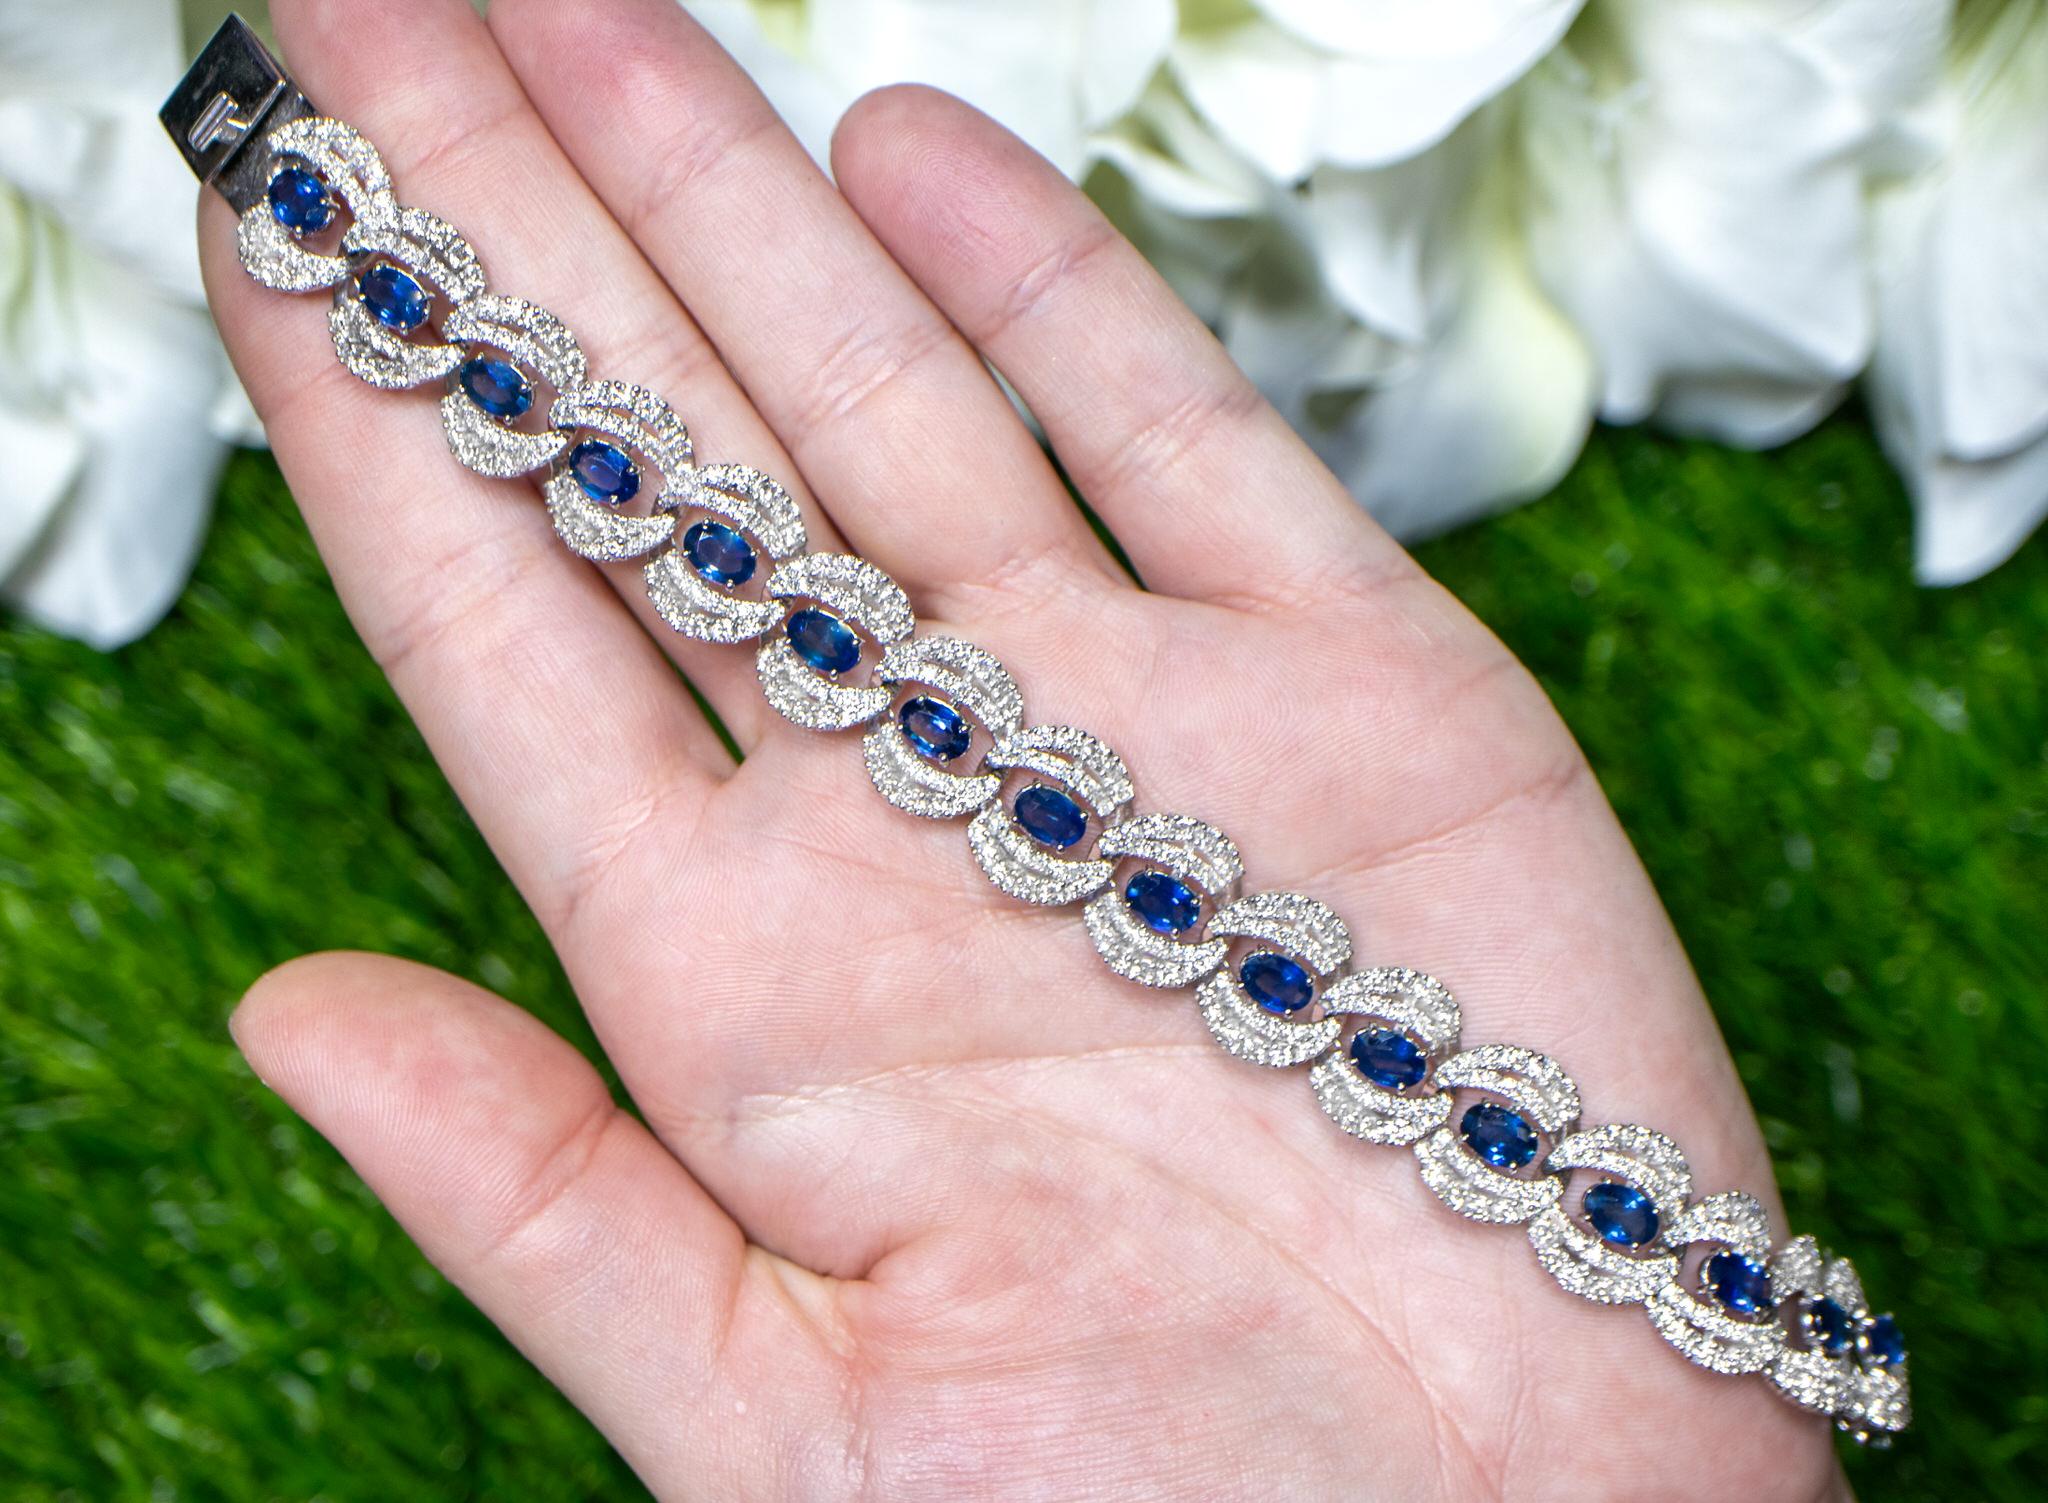 It comes with the Gemological Appraisal by GIA GG/AJP
All Gemstones are Natural
Blue Sapphires = 3.90 Carats
Diamonds = 6.90 Carats
Metal: 18K White Gold
Length: 7.15 Inches
Width: 0.59 Inches